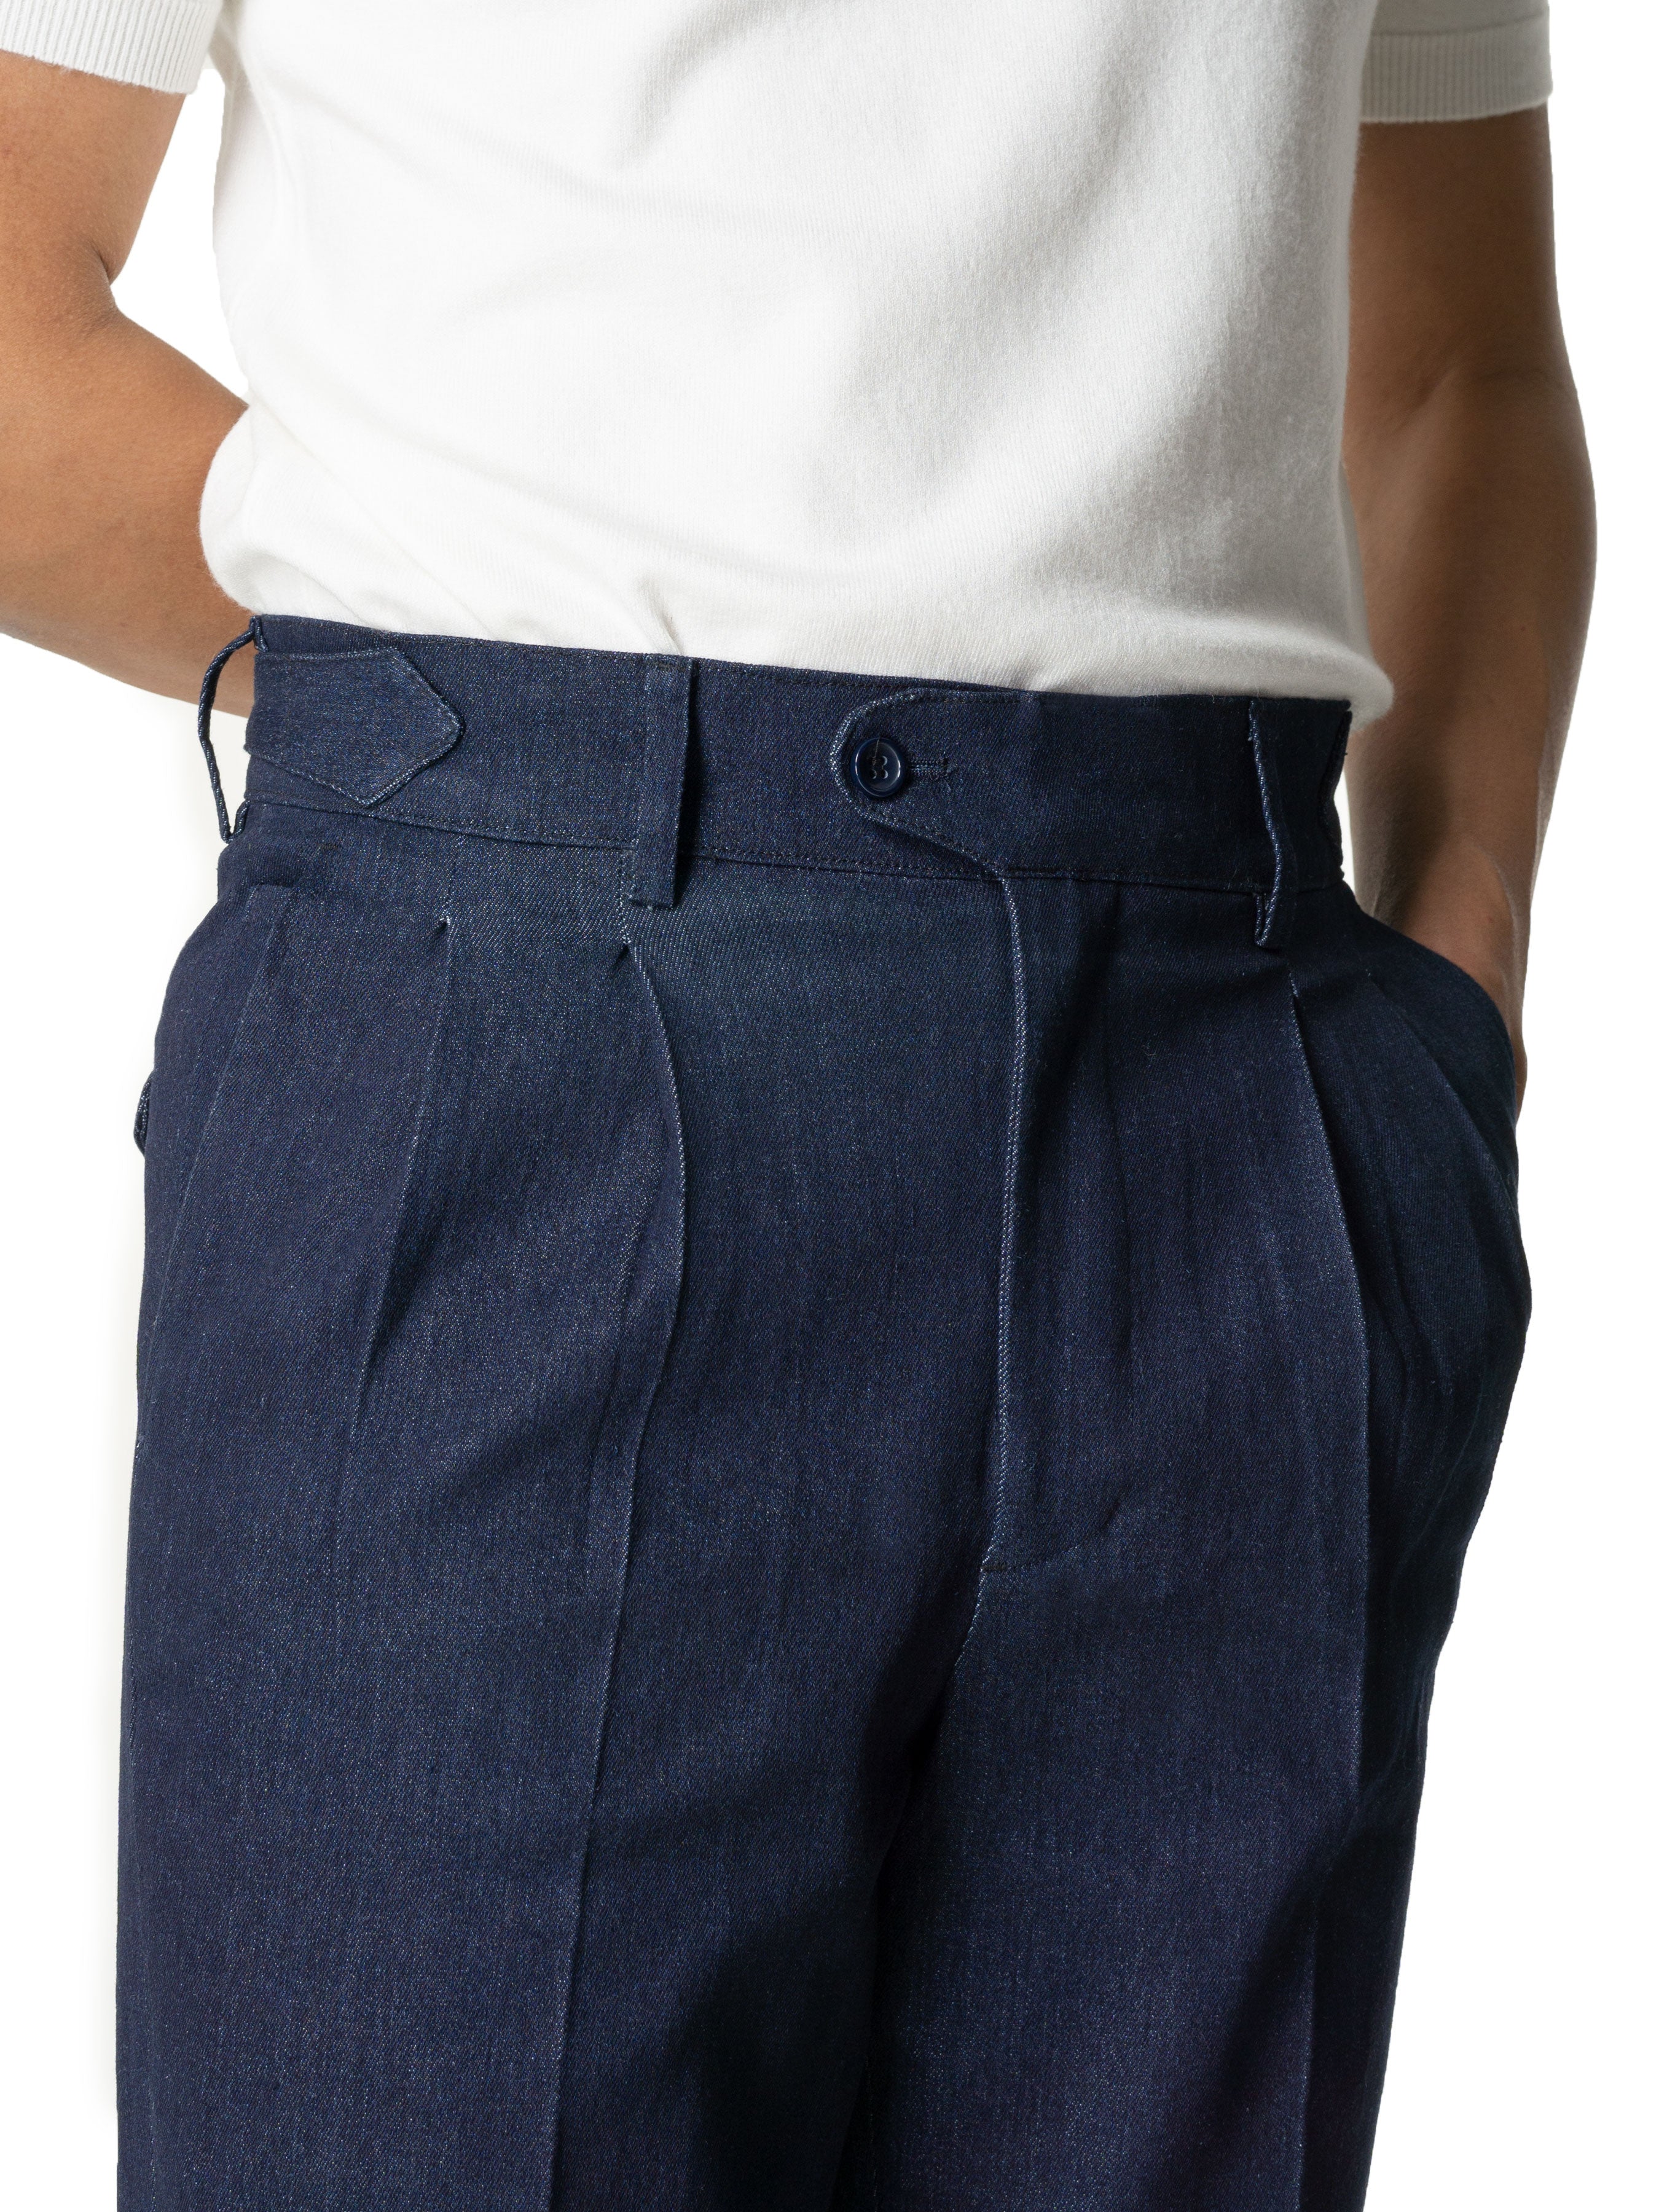 Trousers Belt Loop With Side Adjusters - Denim Dark Blue Cuffed (Stretchable) - Zeve Shoes